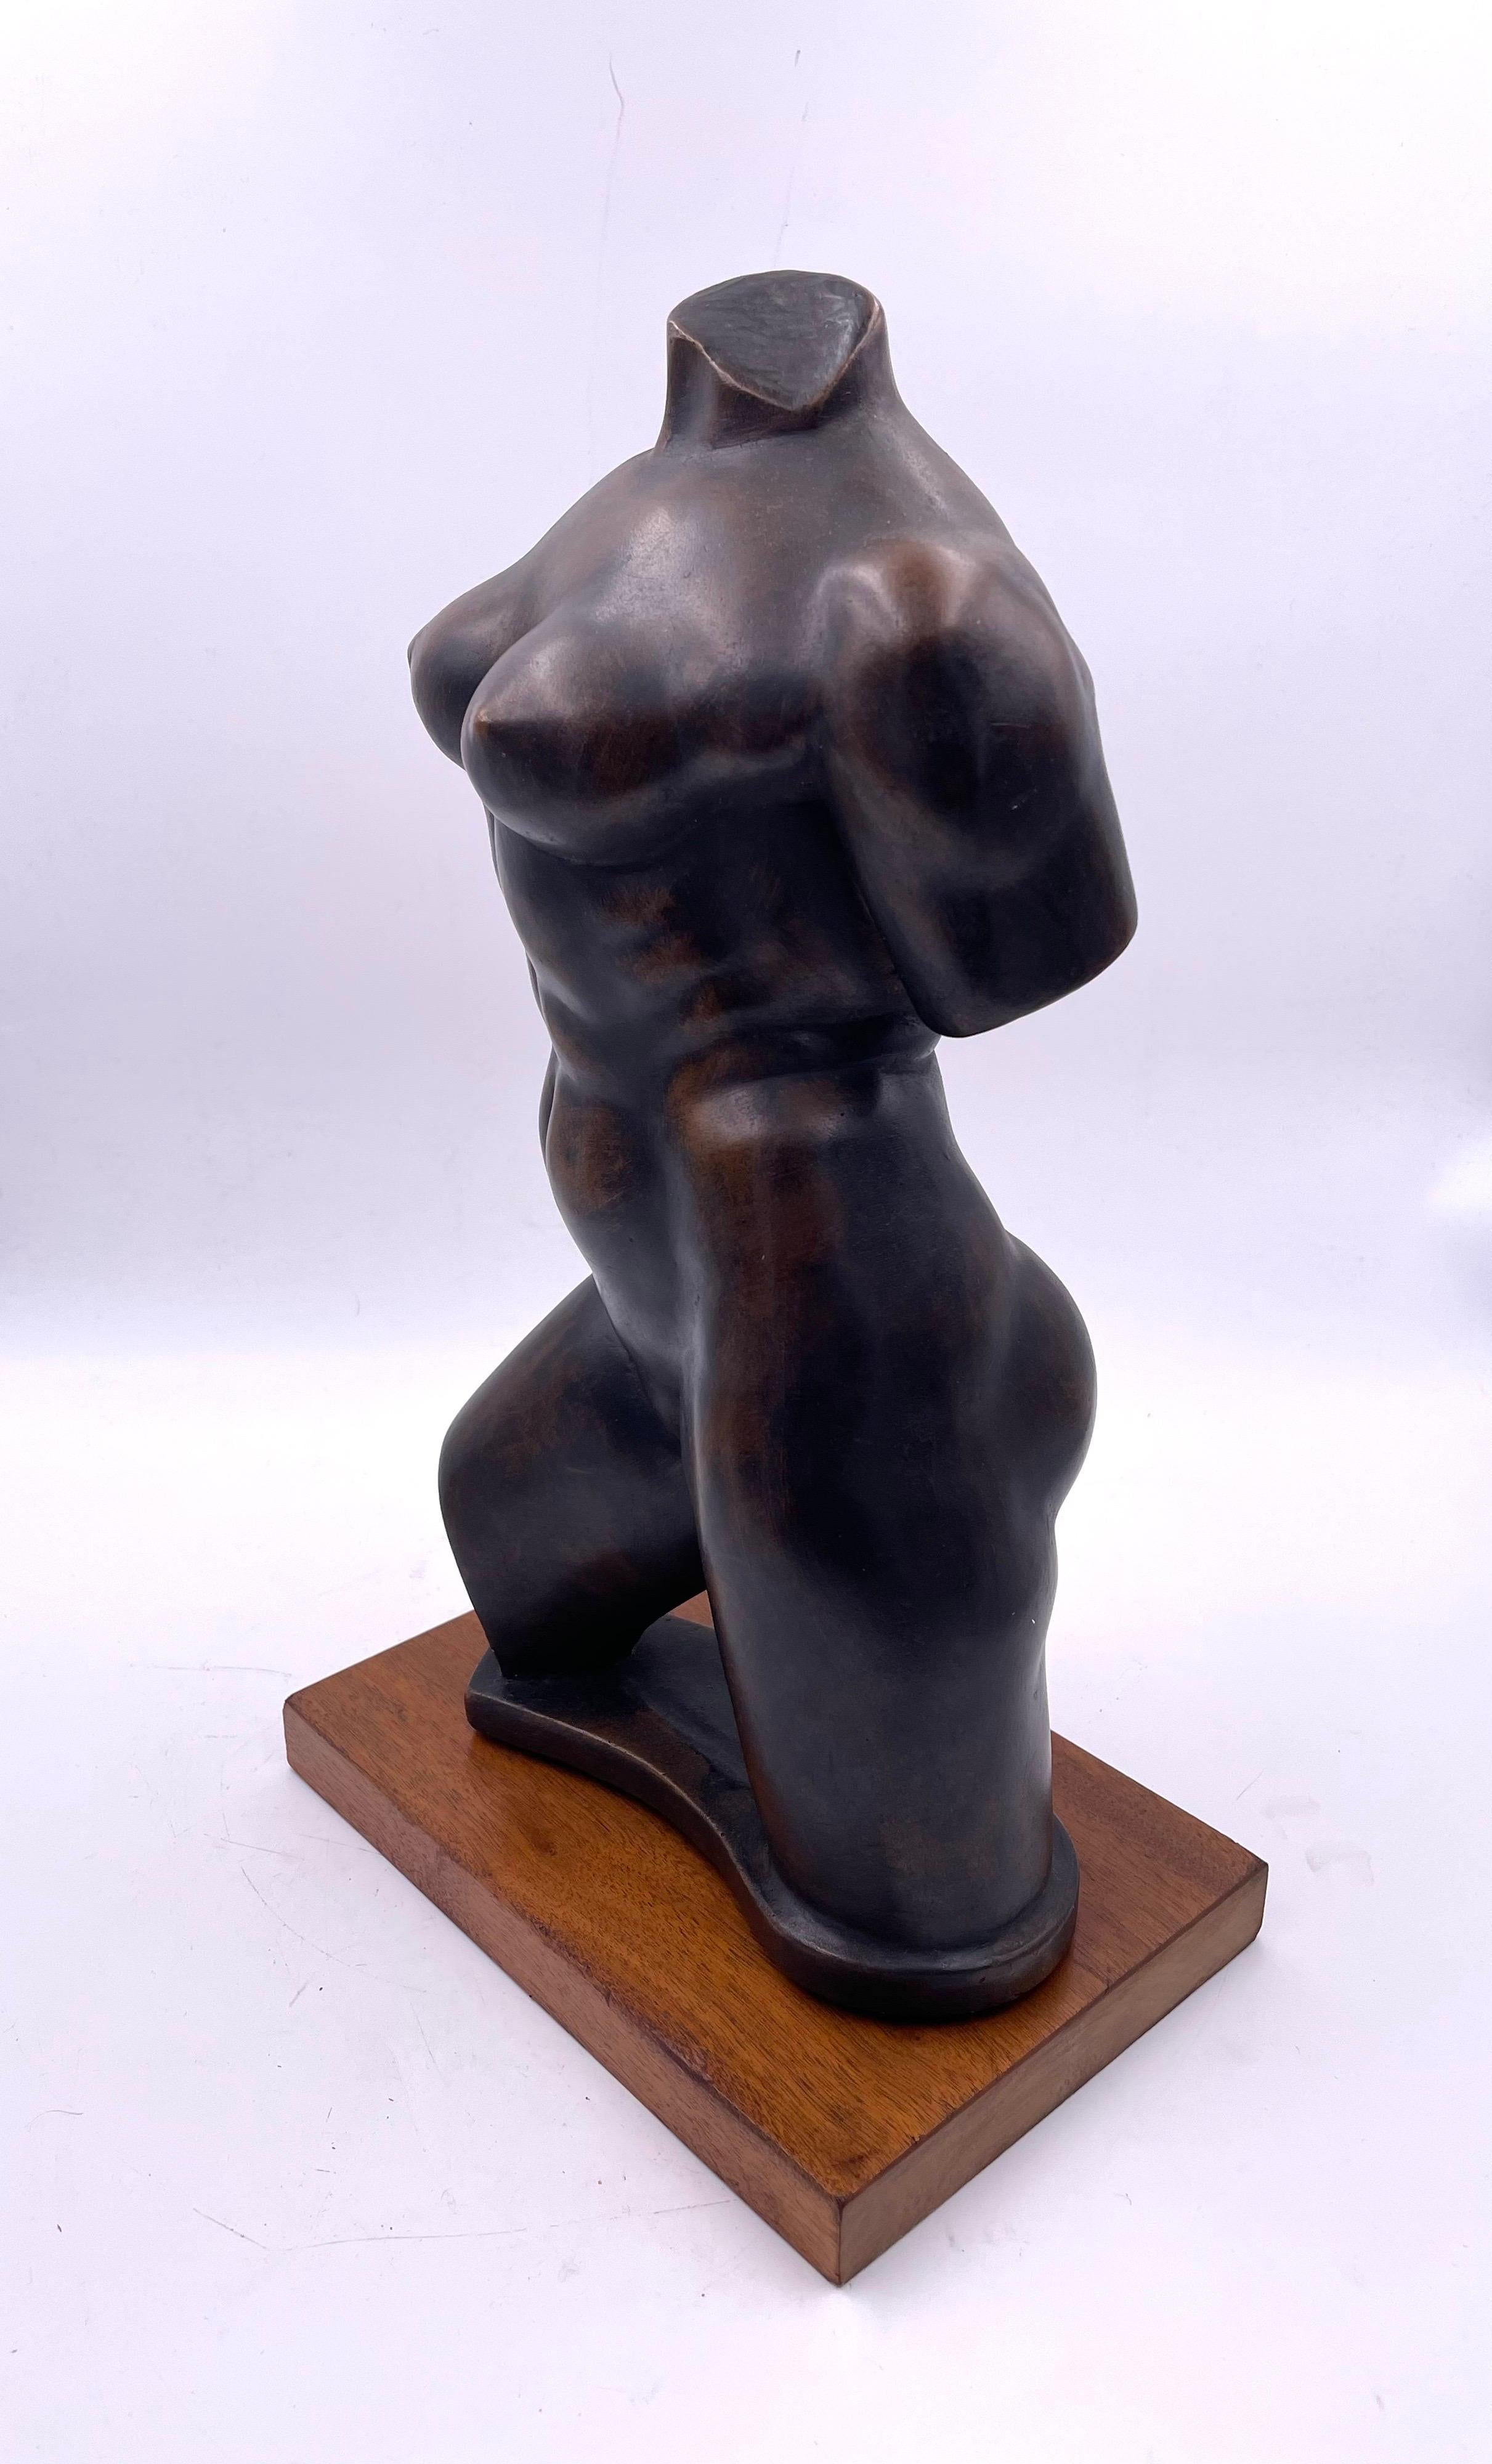 Beautiful reproduction of a nude bust in a patinated bronze finish sitting on a solid walnut base, circa 1950's by Austin productions. Made of ceramic and faux bronze finish.